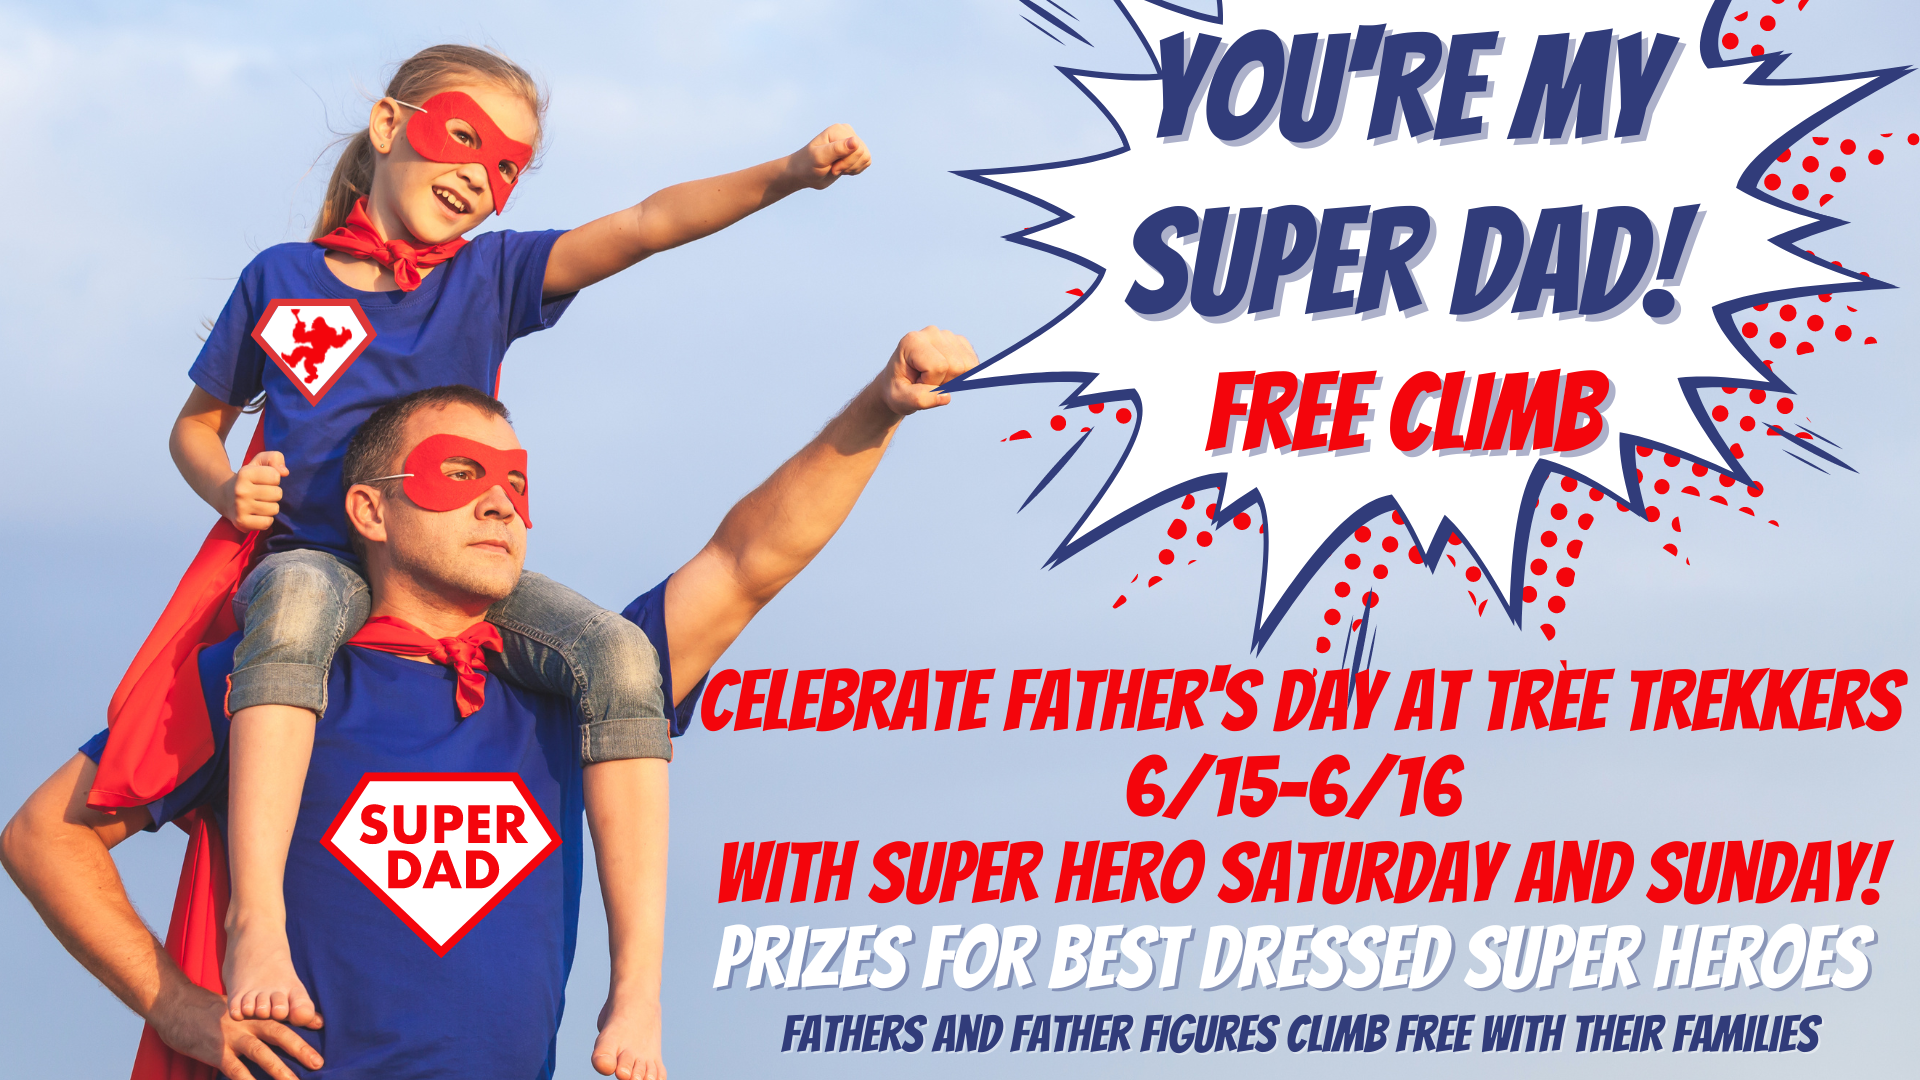 Father's day discount graphic for Super Dads at Tree Trekkers